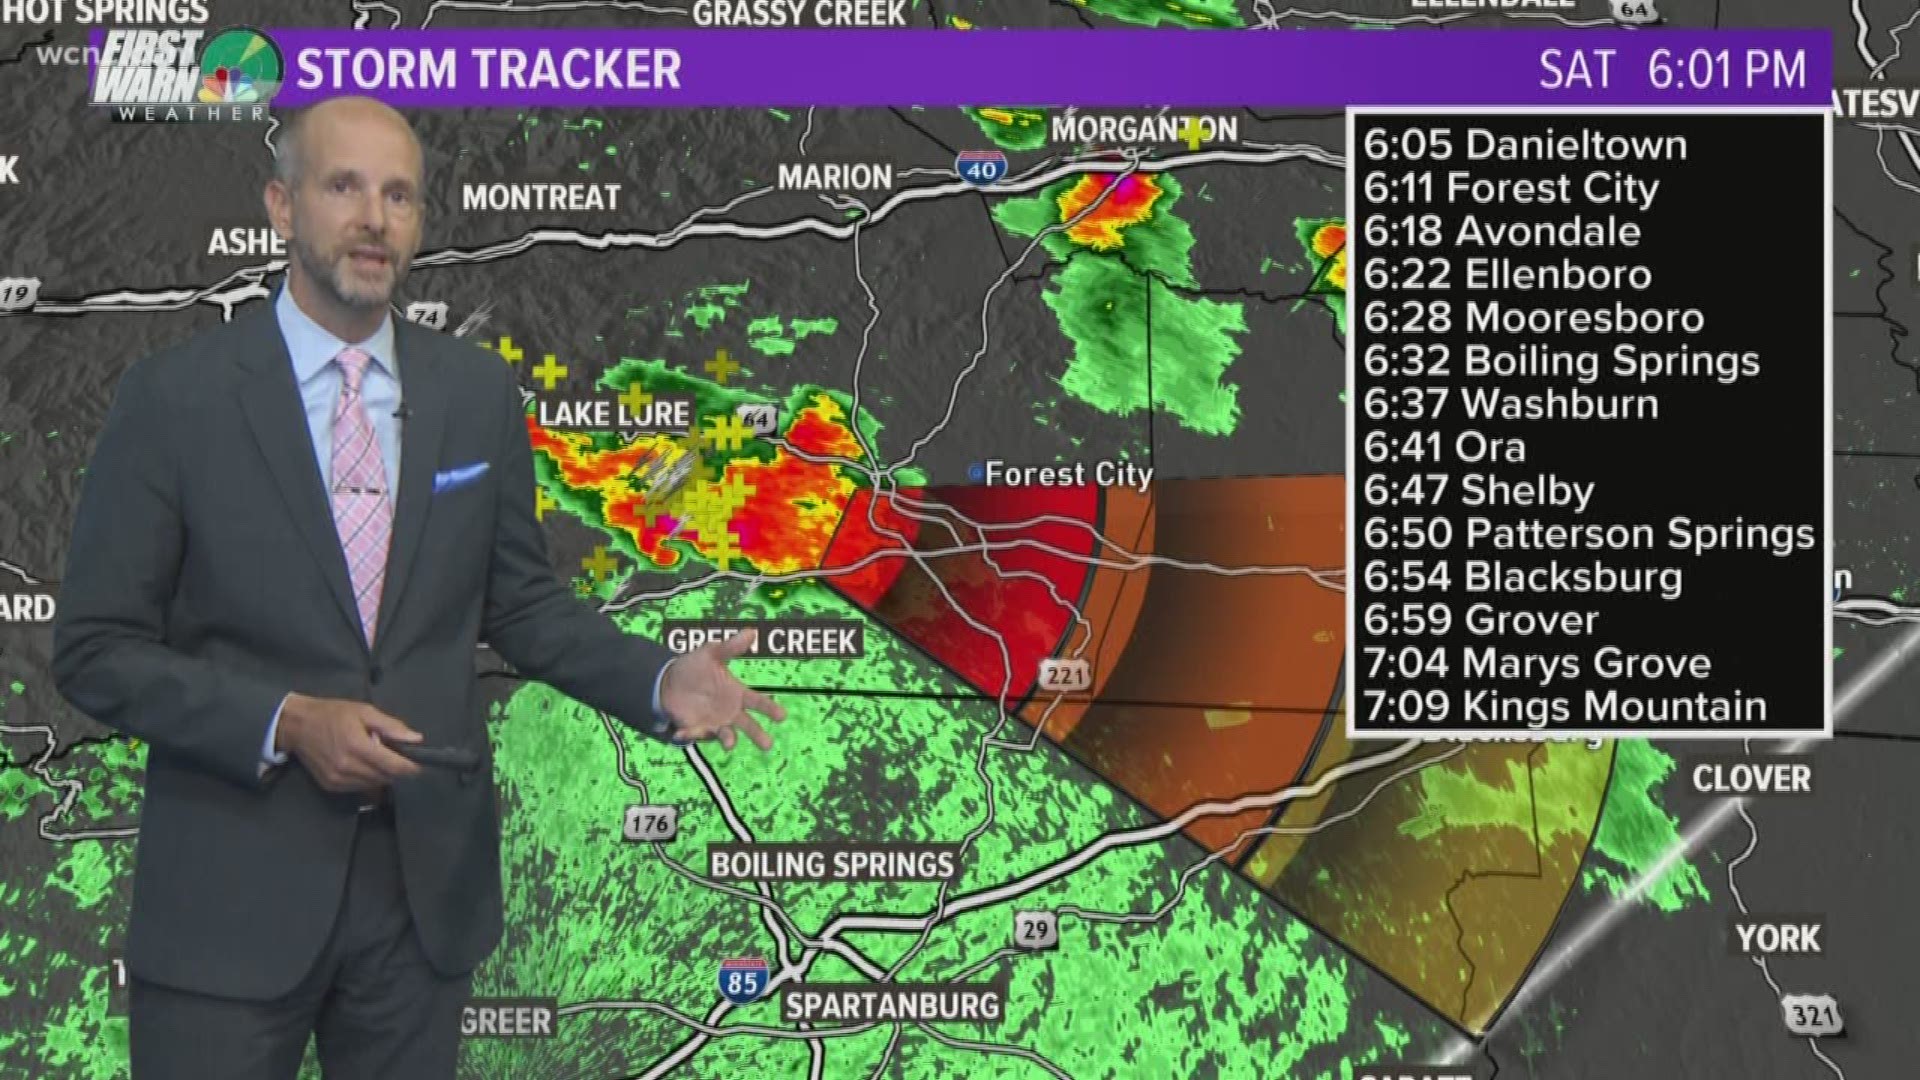 Brad Panovich is tracking the possible storms in the Charlotte area.